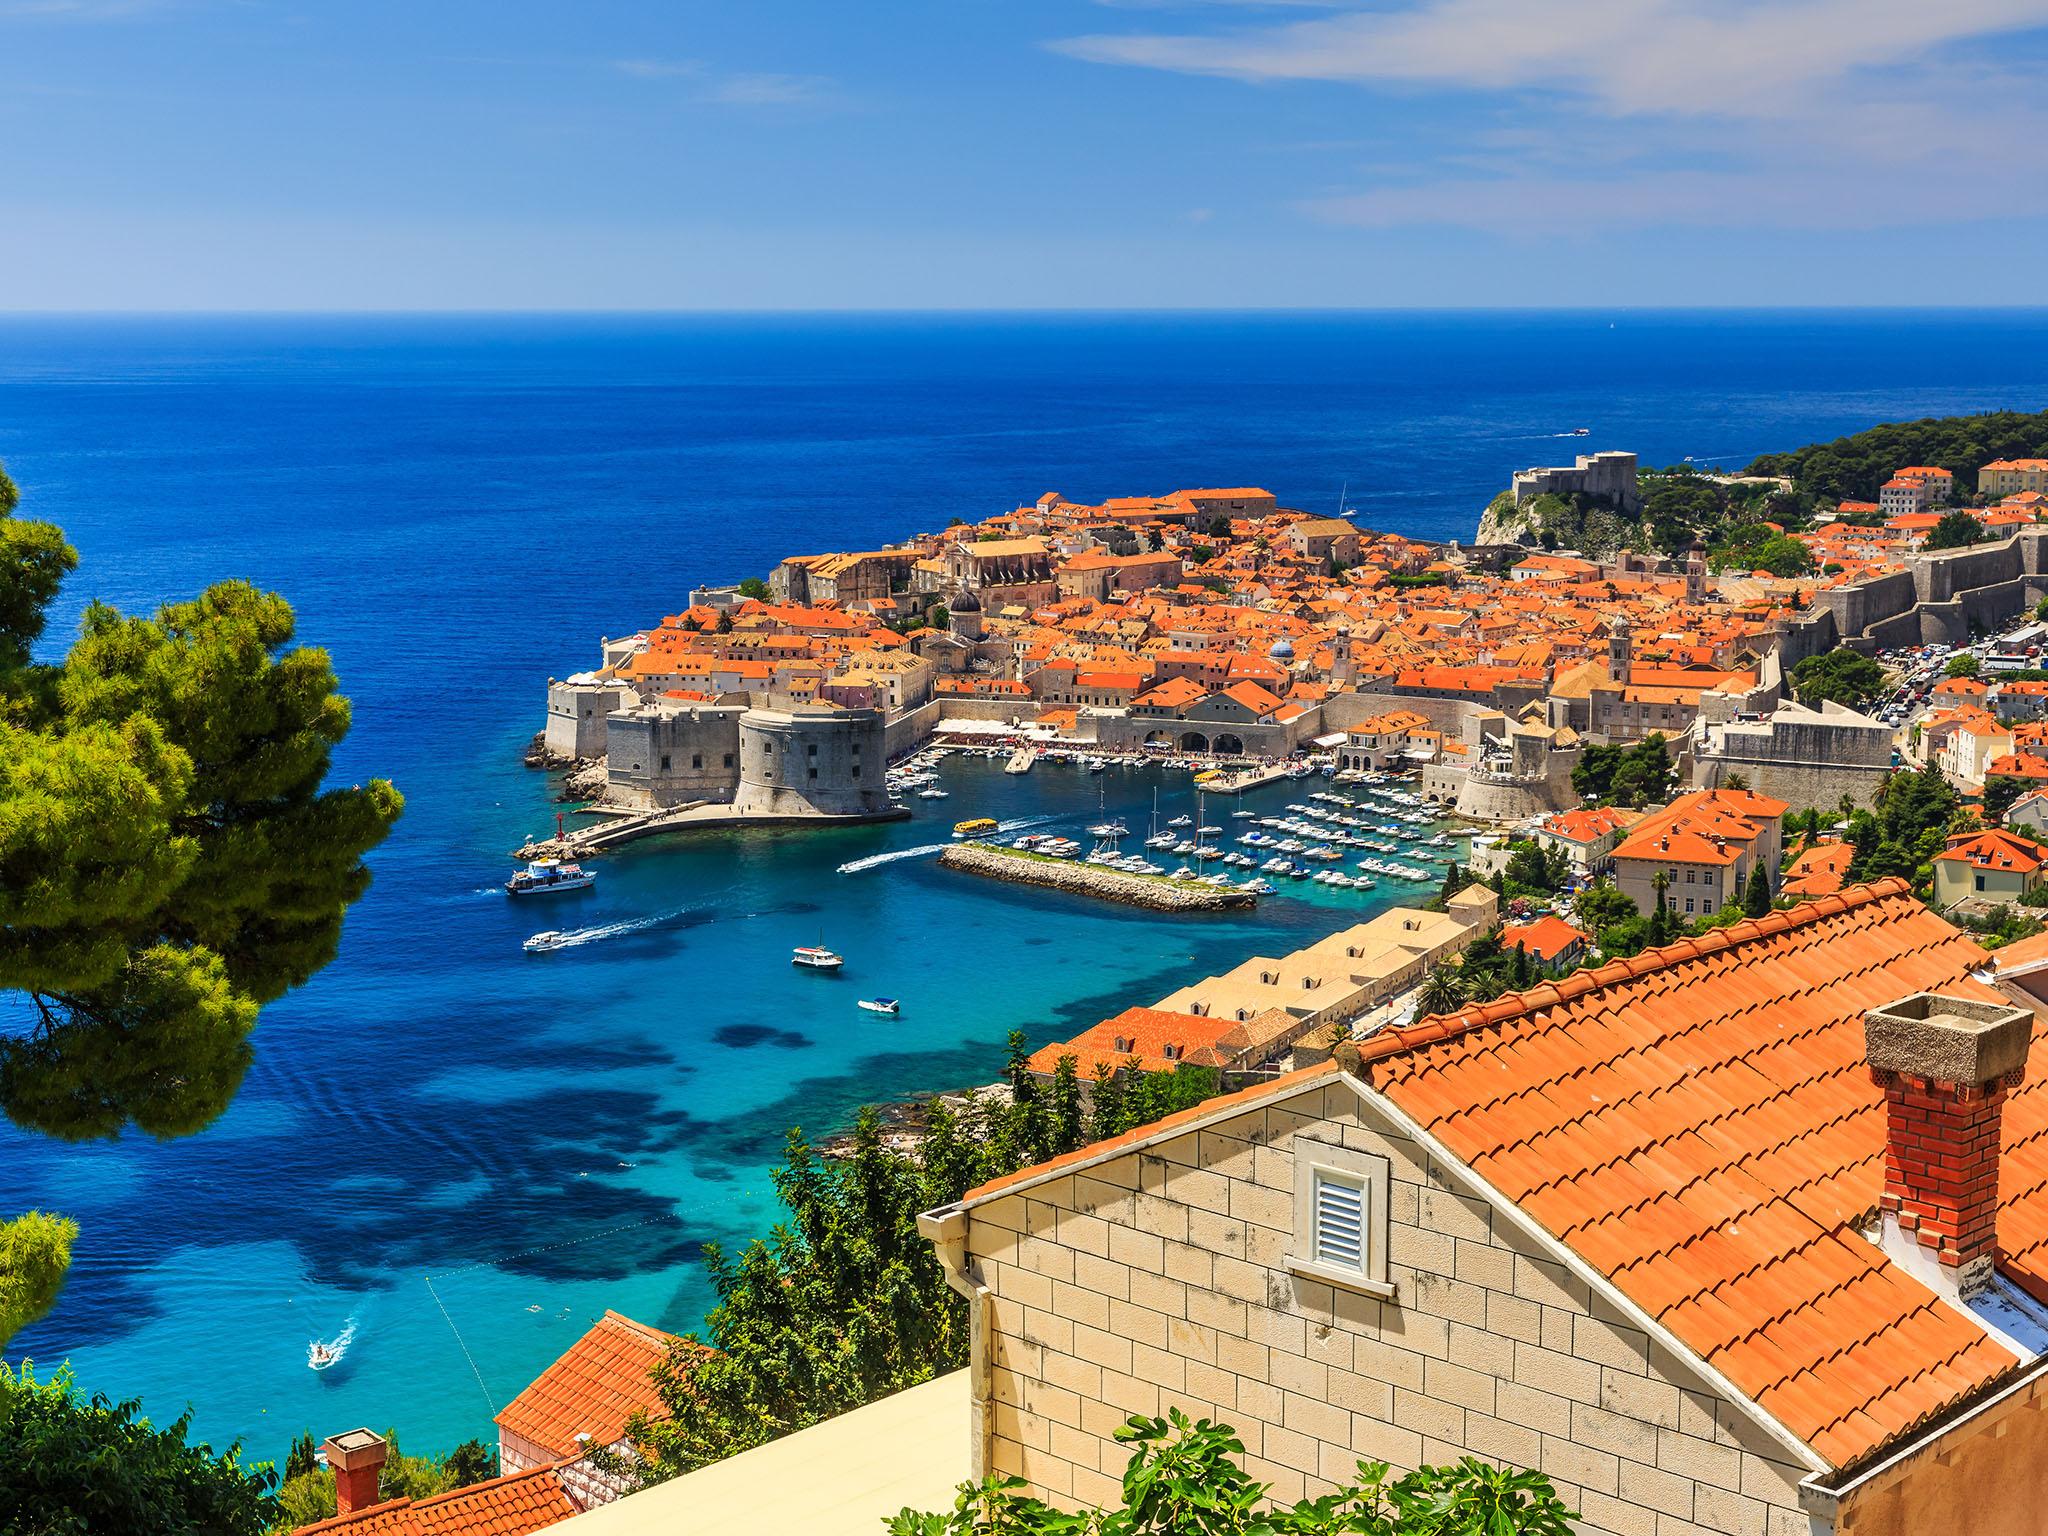 Got it all: Dubrovnik is a gem of a place, with a fab Old Town, fab beaches, and great bars to chill in